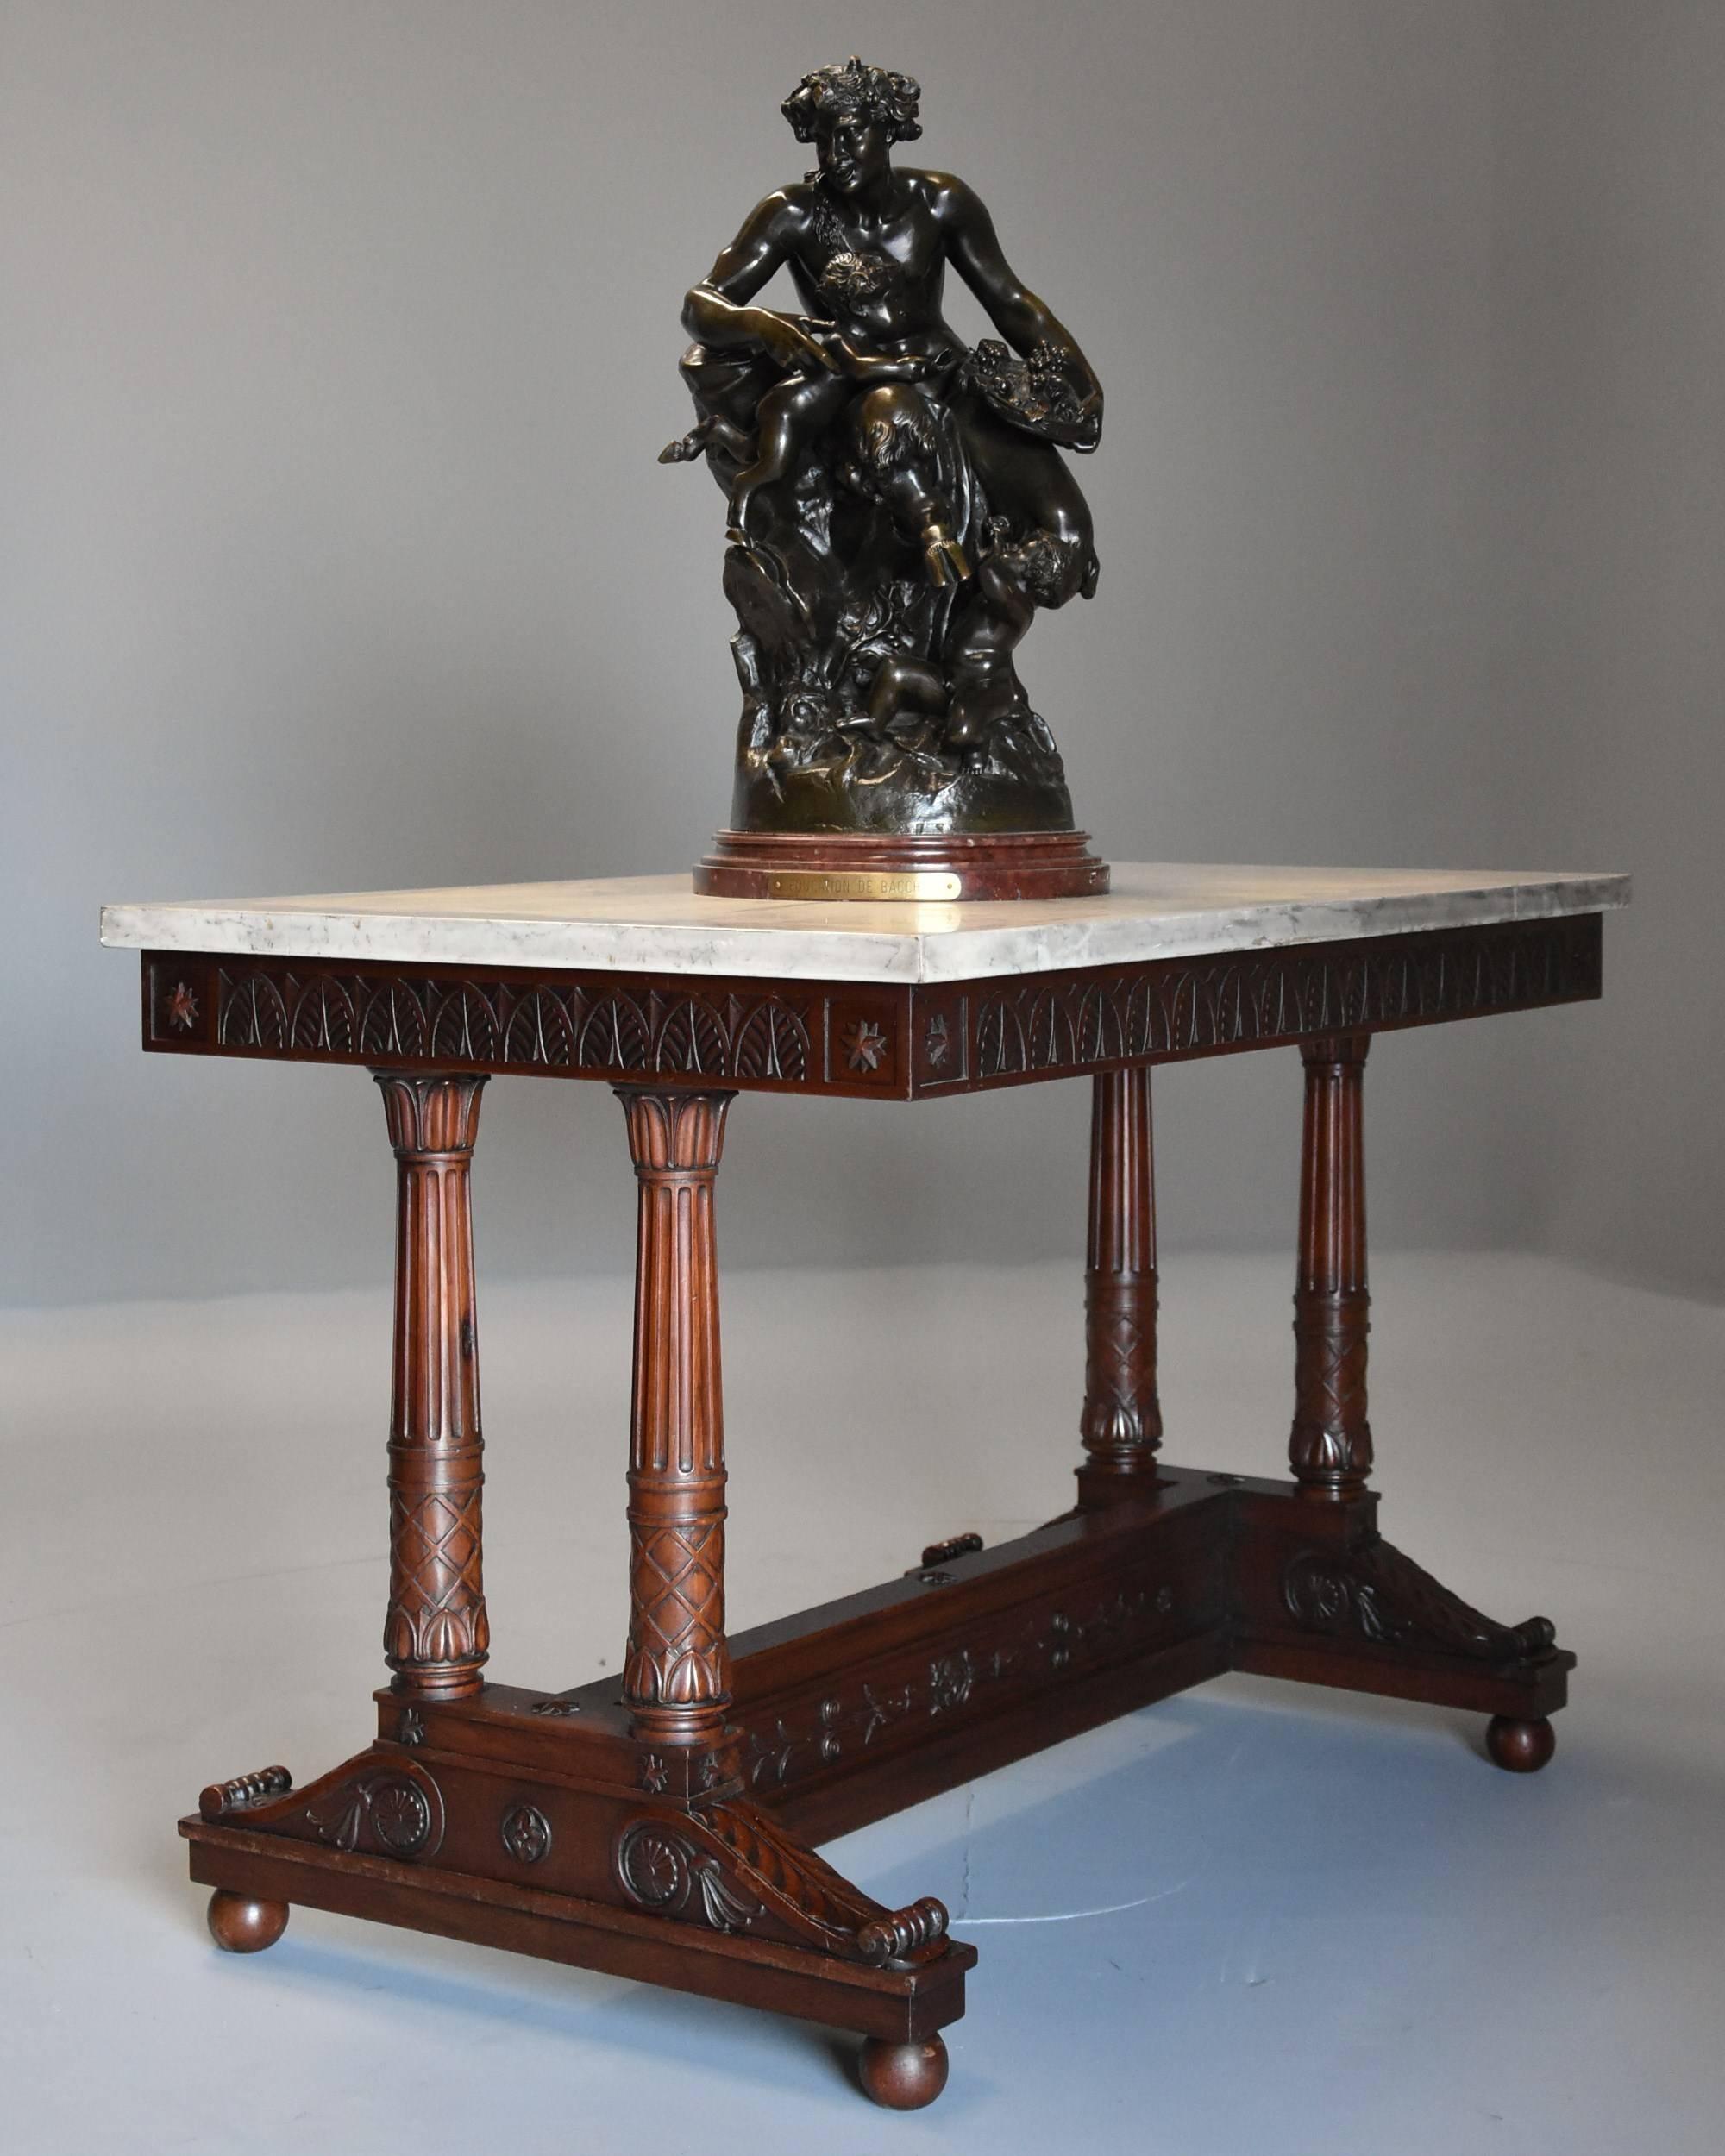 Rare French Empire Oblong Centre Table with Marble Top, Stamped 'JACOB' For Sale 1